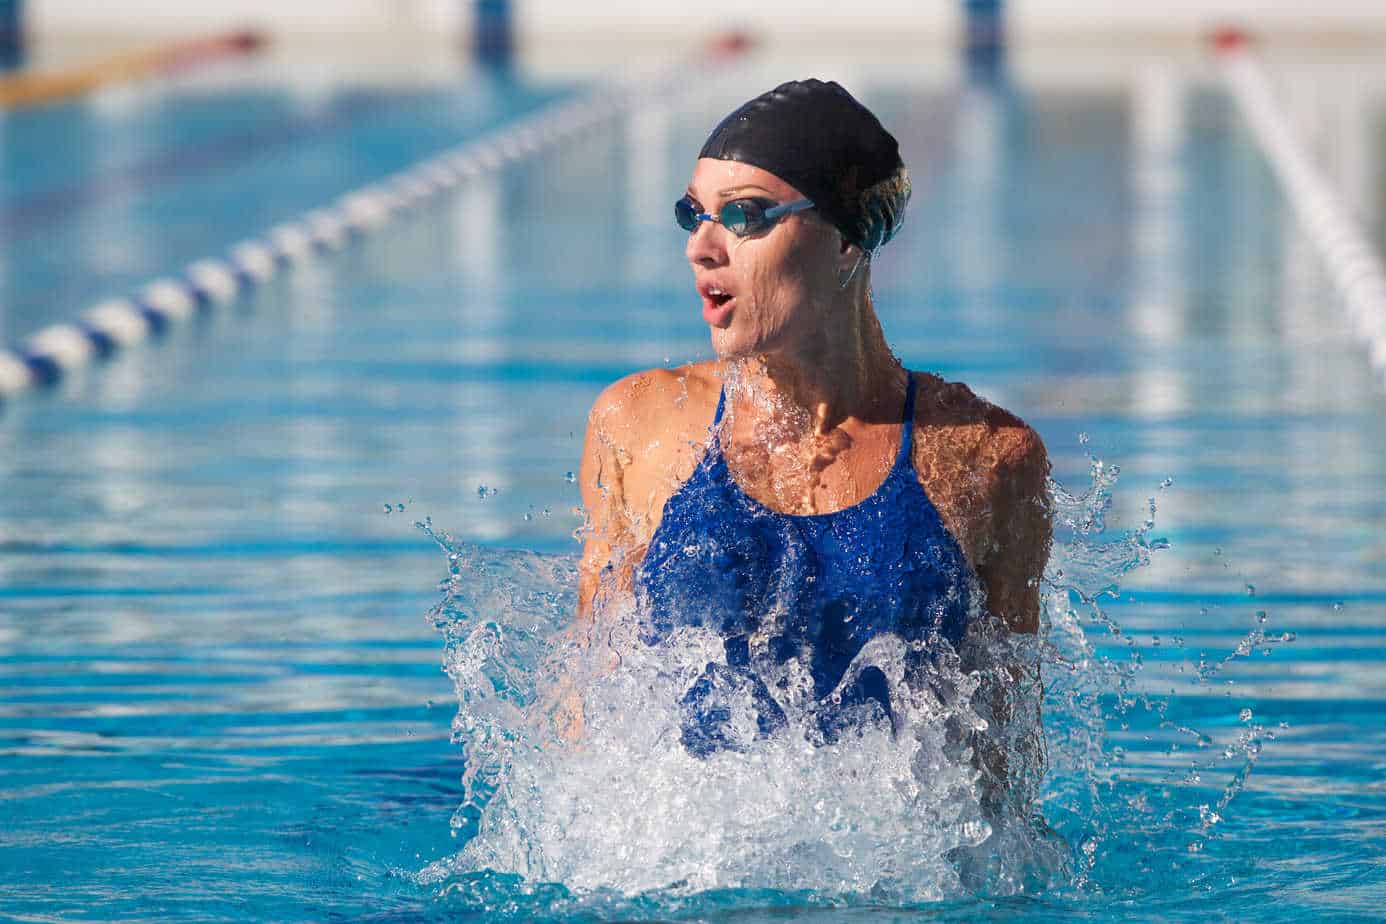 A female swimmer in a blue swimsuit and swim cap, emerging from the water in an outdoor pool during a swim.